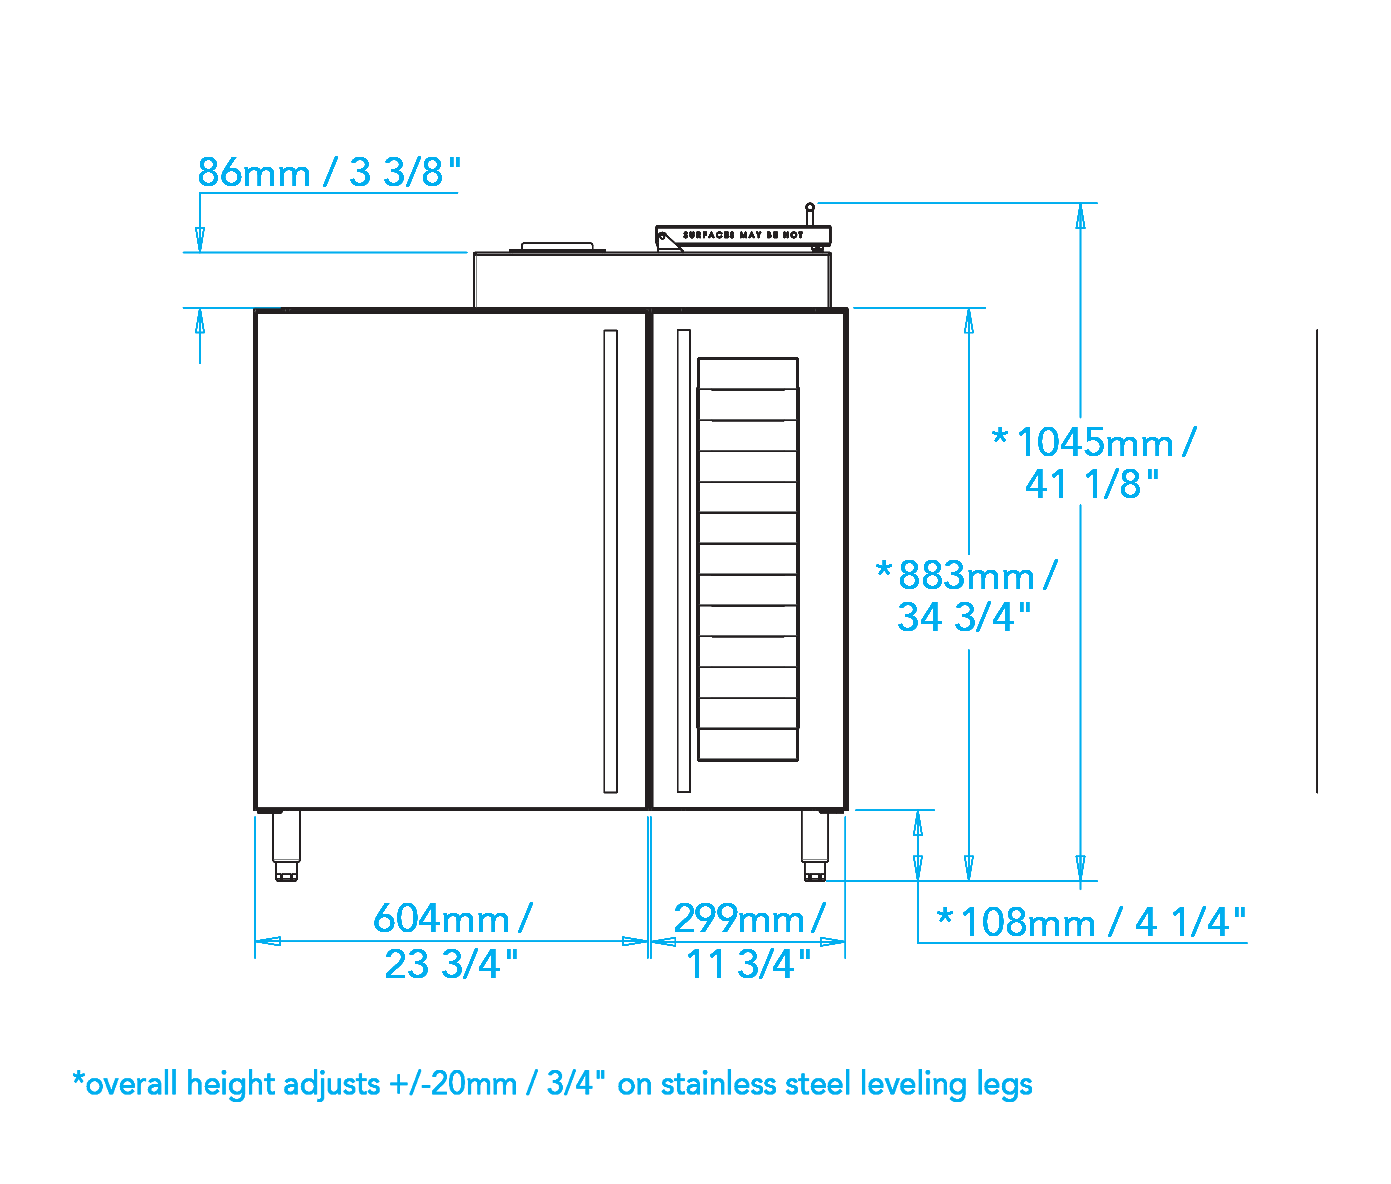 Built-in Smoker Cabinet Dimensions Image